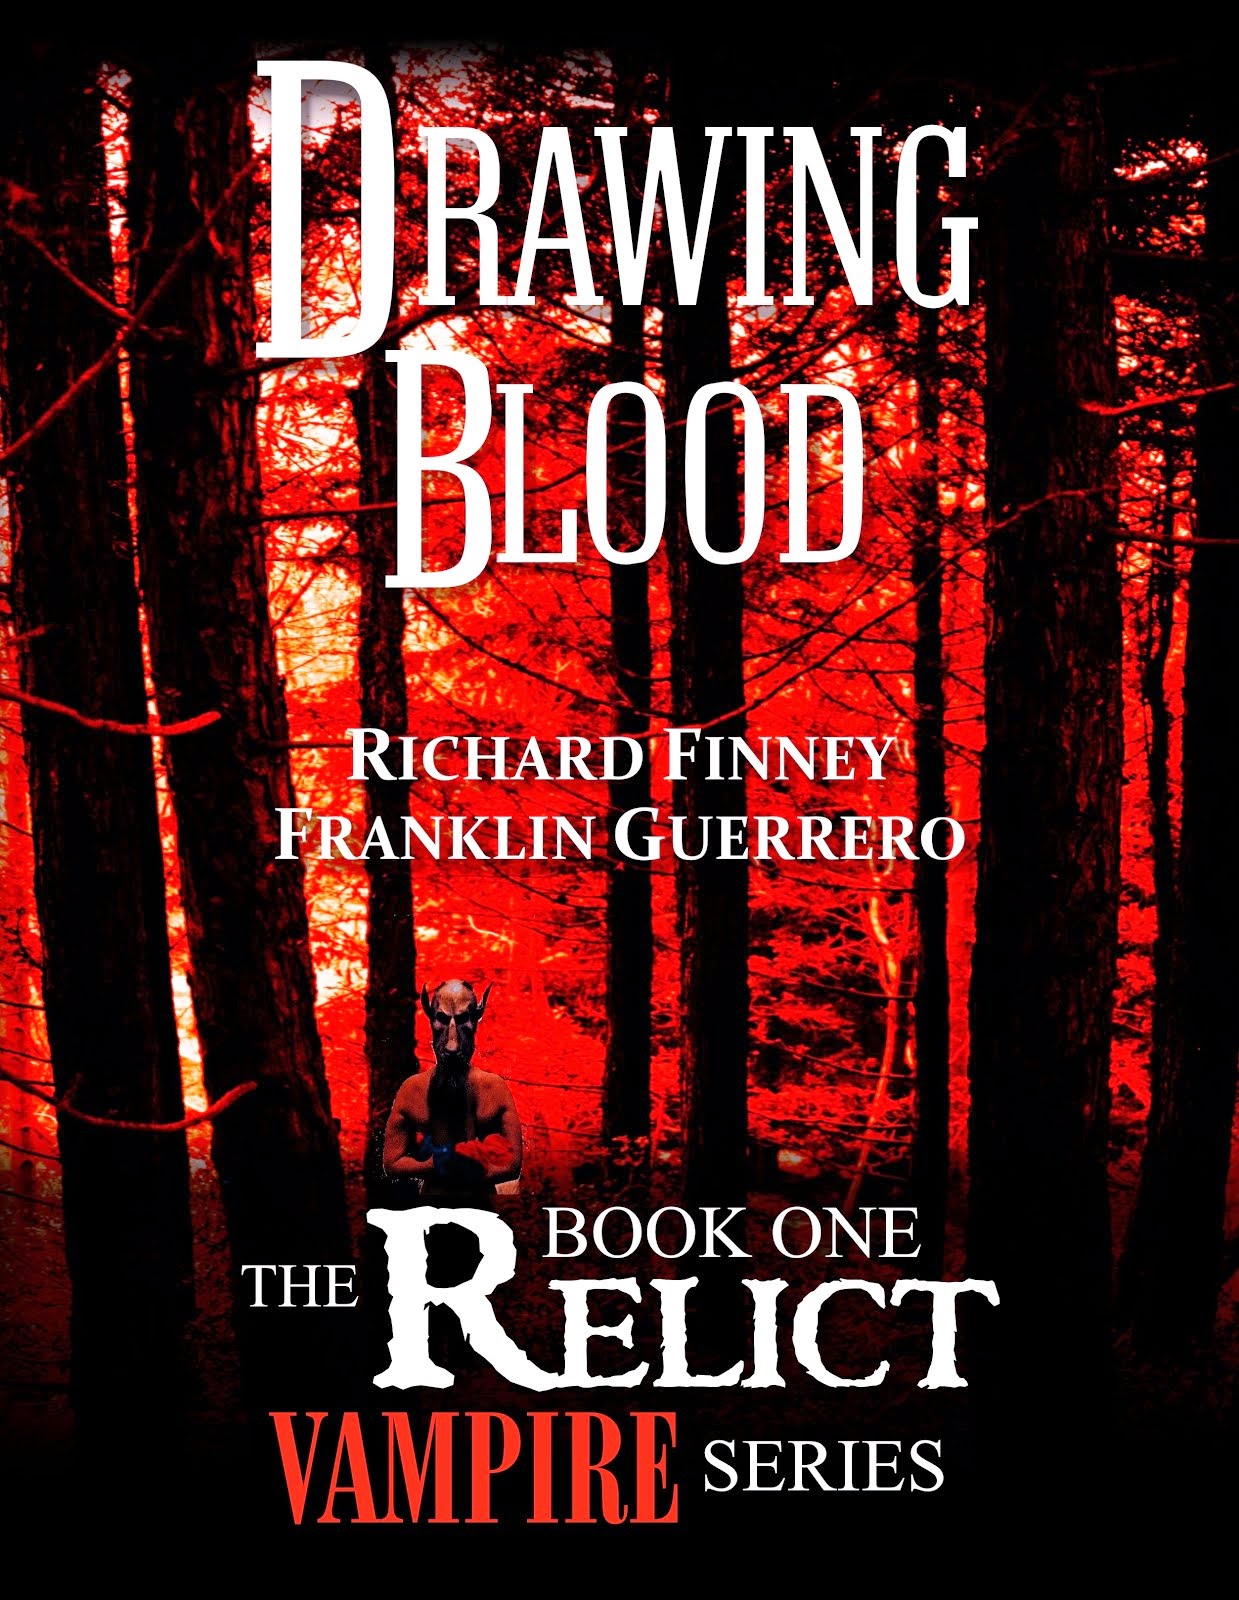 RELICT - Book One of the Vampire Series is just 99 cents!